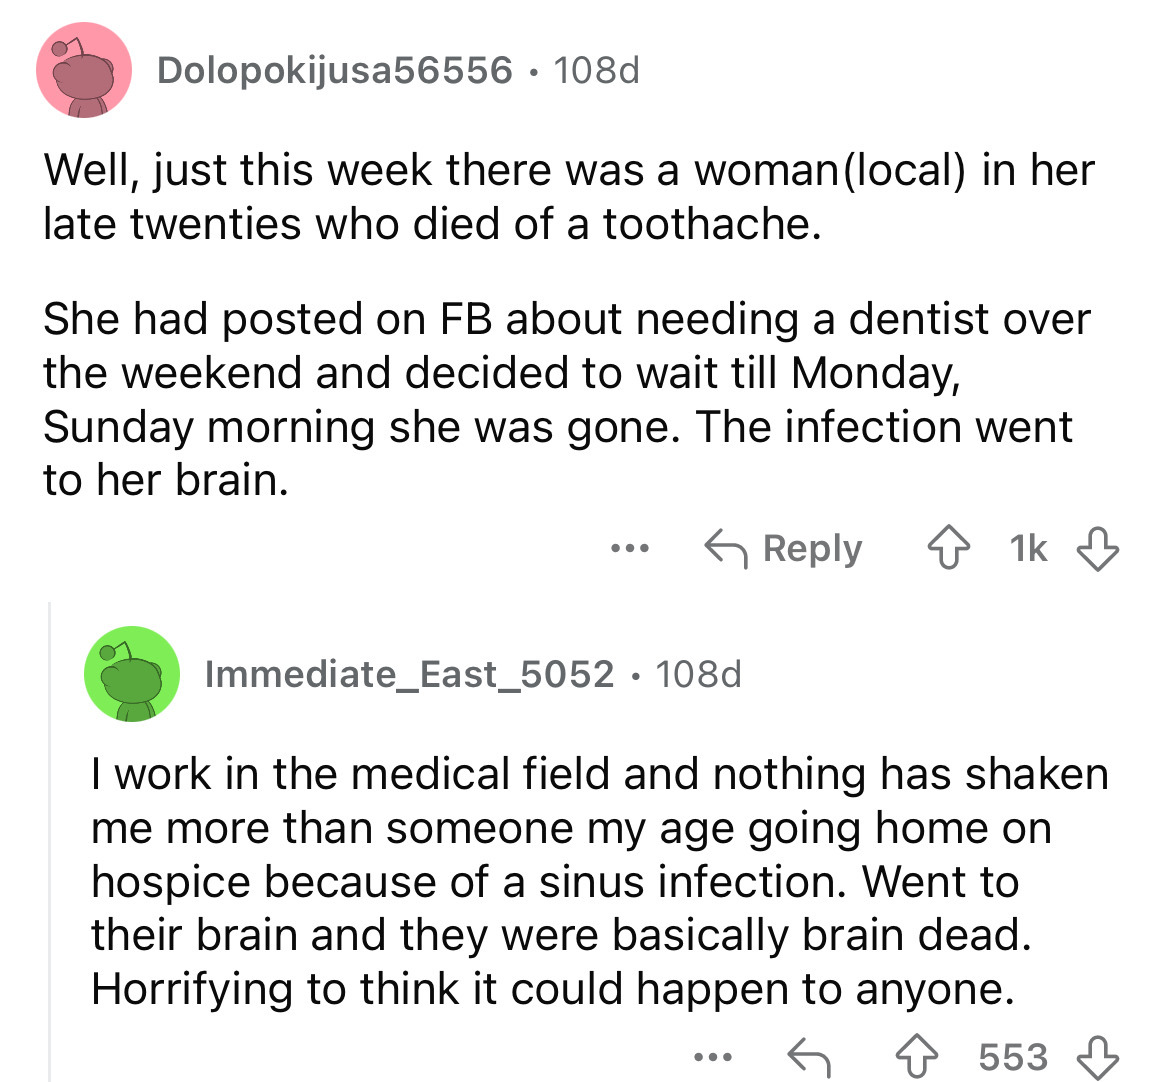 screenshot - Dolopokijusa56556.108d Well, just this week there was a woman local in her late twenties who died of a toothache. She had posted on Fb about needing a dentist over the weekend and decided to wait till Monday, Sunday morning she was gone. The 